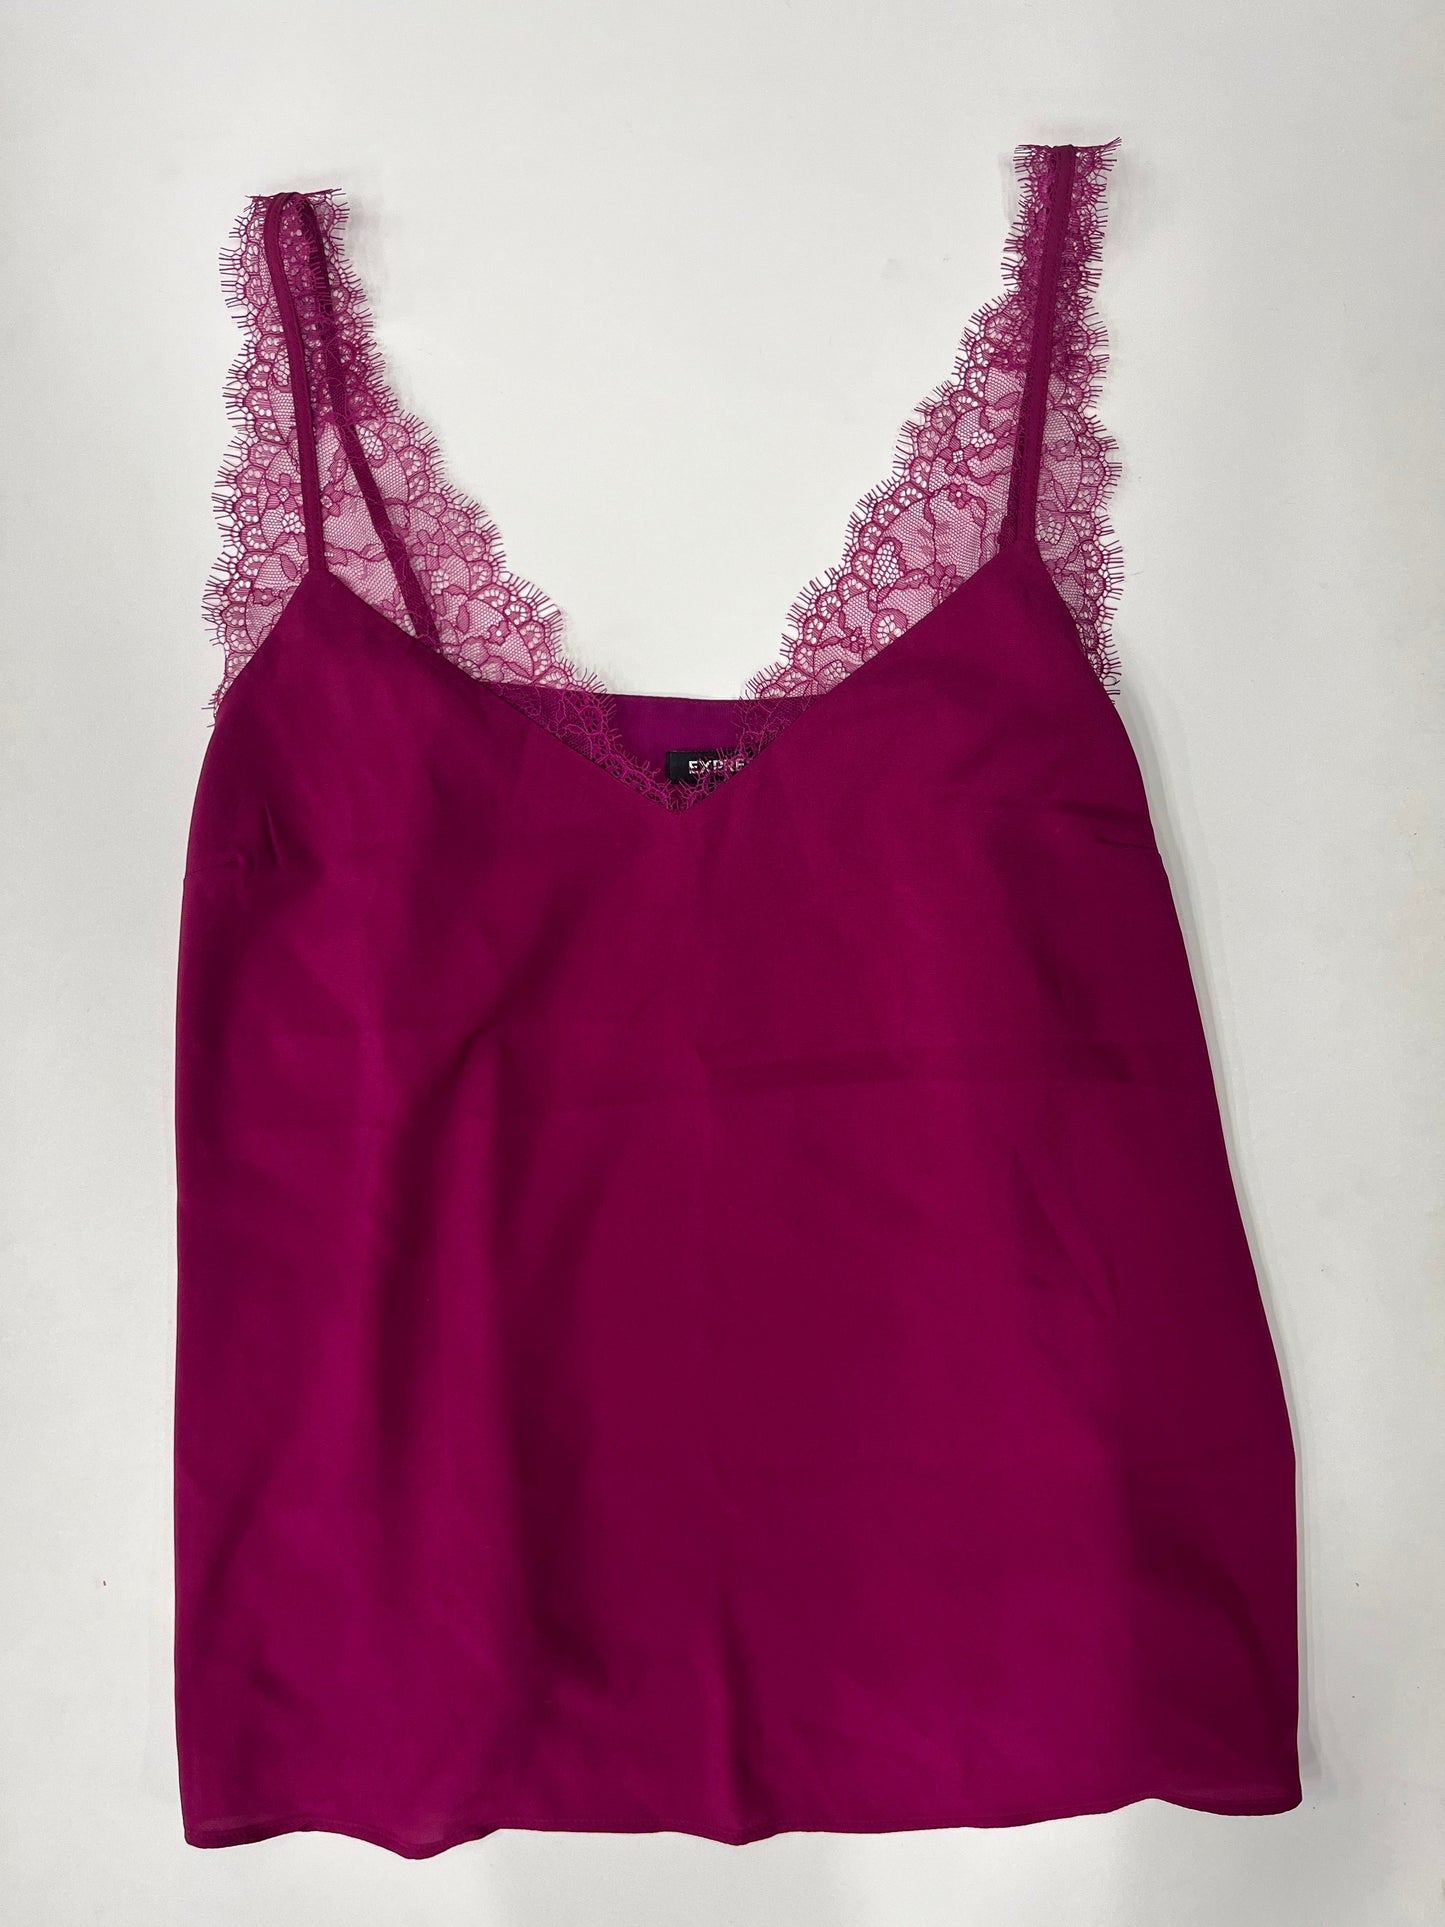 Top Sleeveless By Express NWT  Size: L